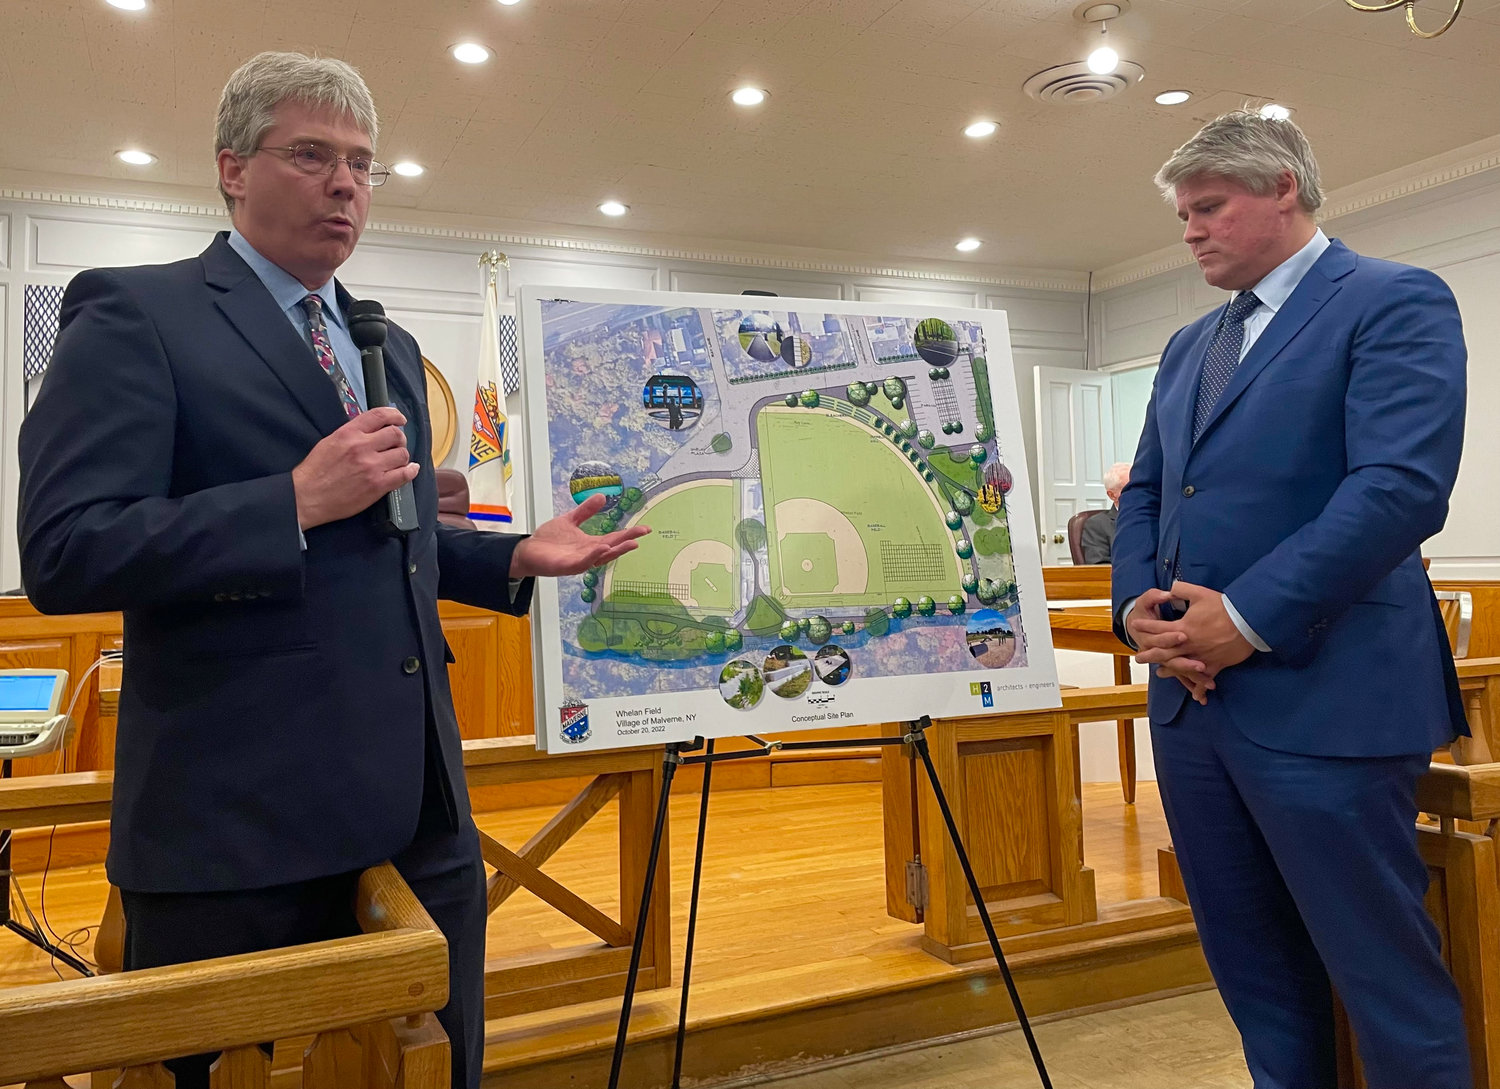 Matthew Mohlin, vice president of the architectural firm H2M, left, joined Corbett at a village board meeting on Oct. 20 for a presentation on a number of proposed upgrades to Whelan Field.